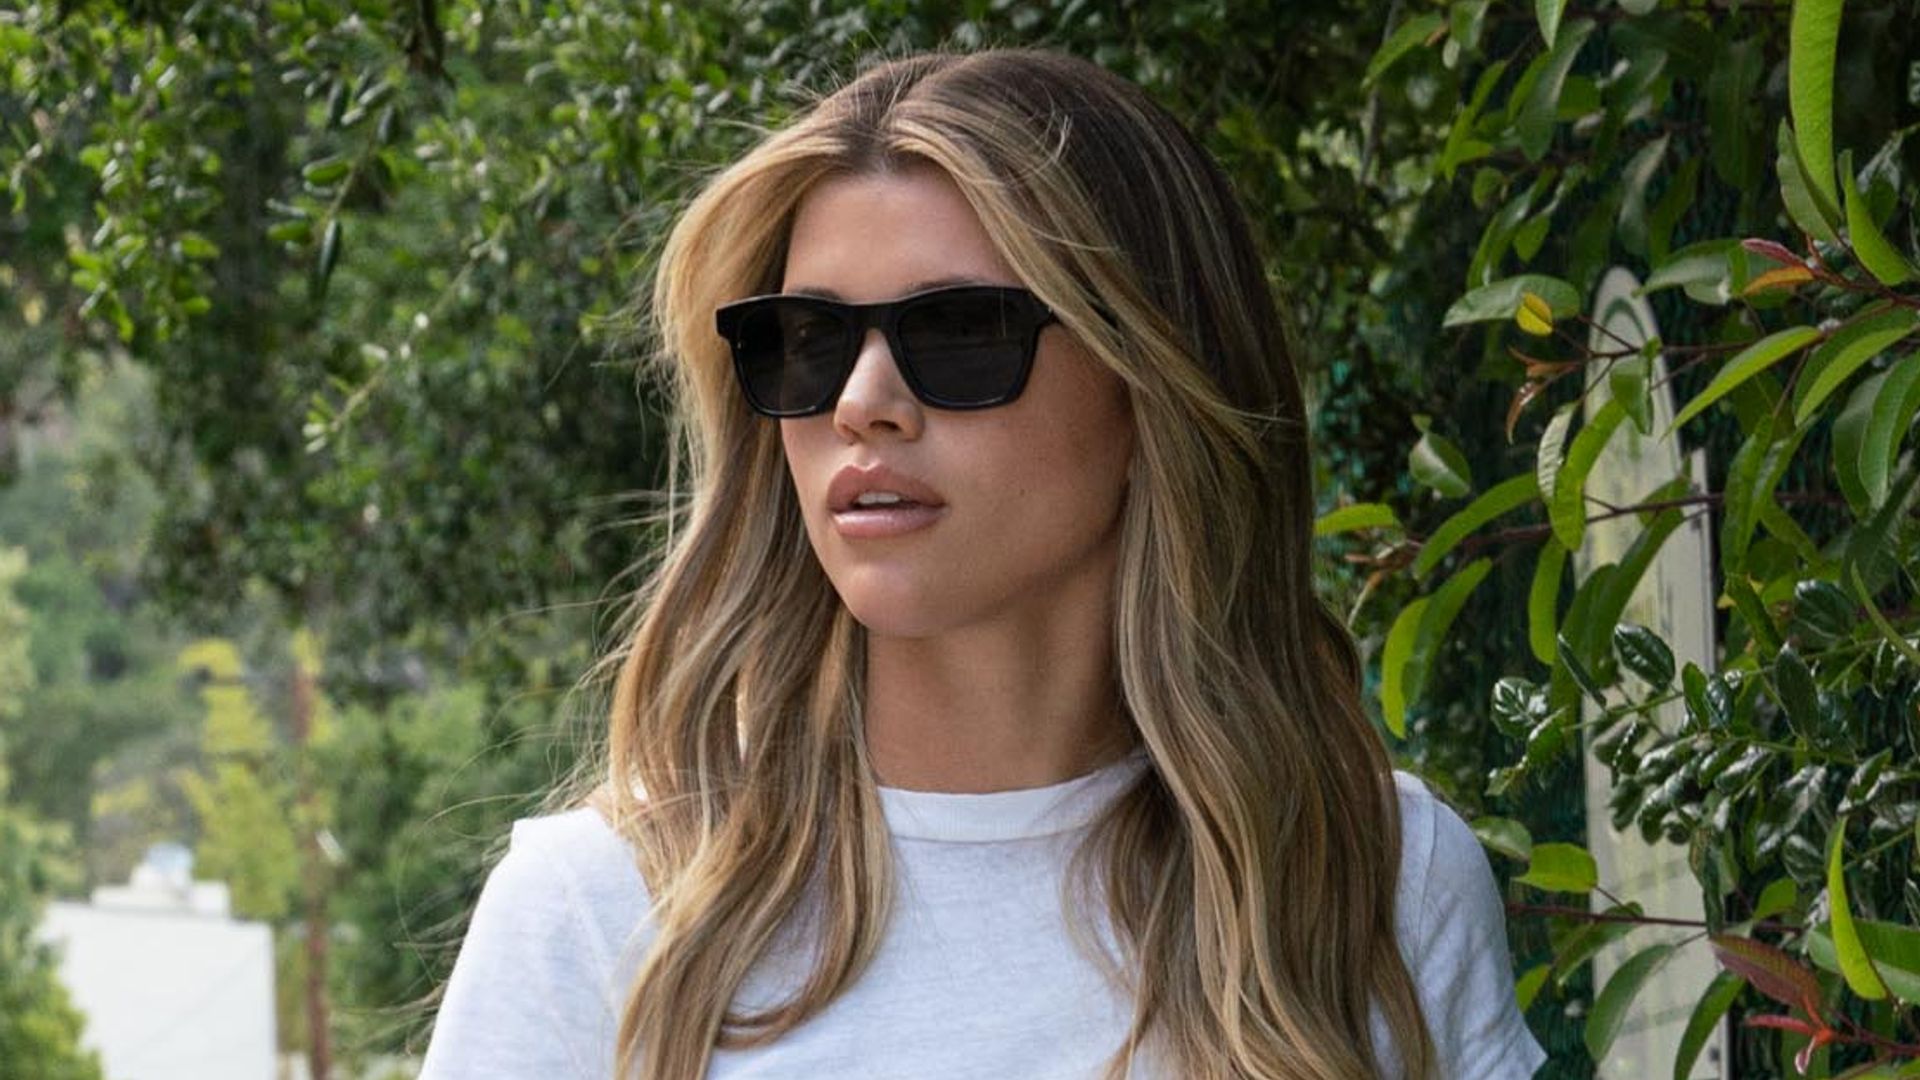 Sofia Richie just wore the coolest Lionel Richie graphic tee, and now we want one